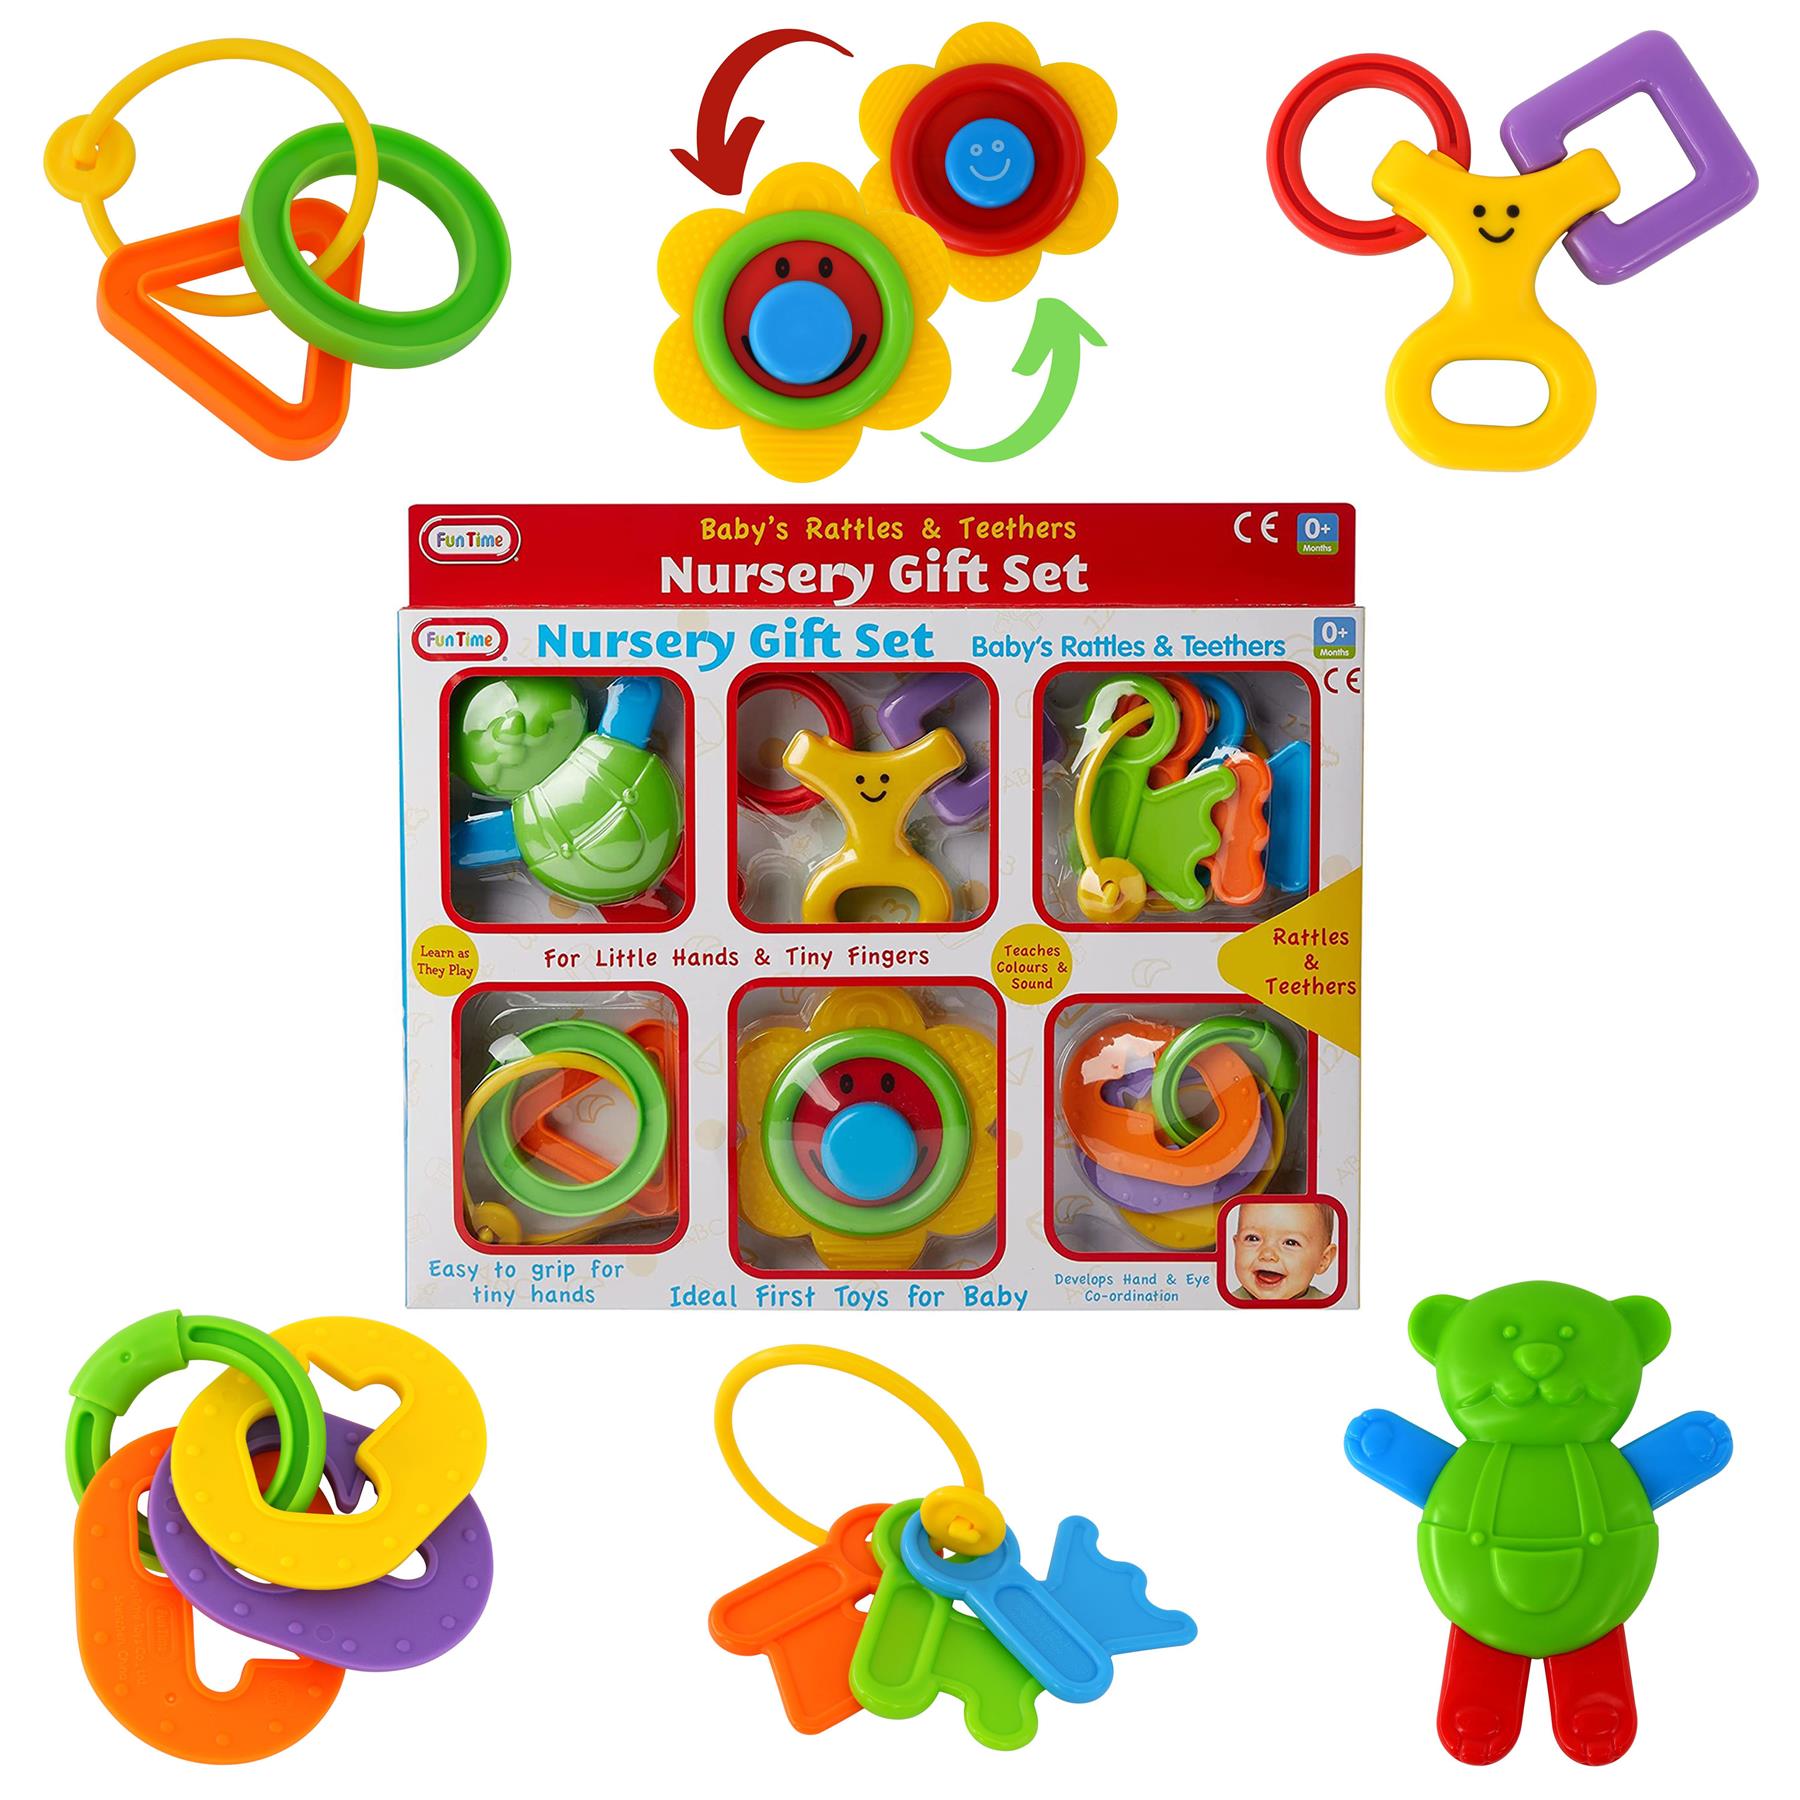 100% Safe Baby Rattles - 7 Pieces